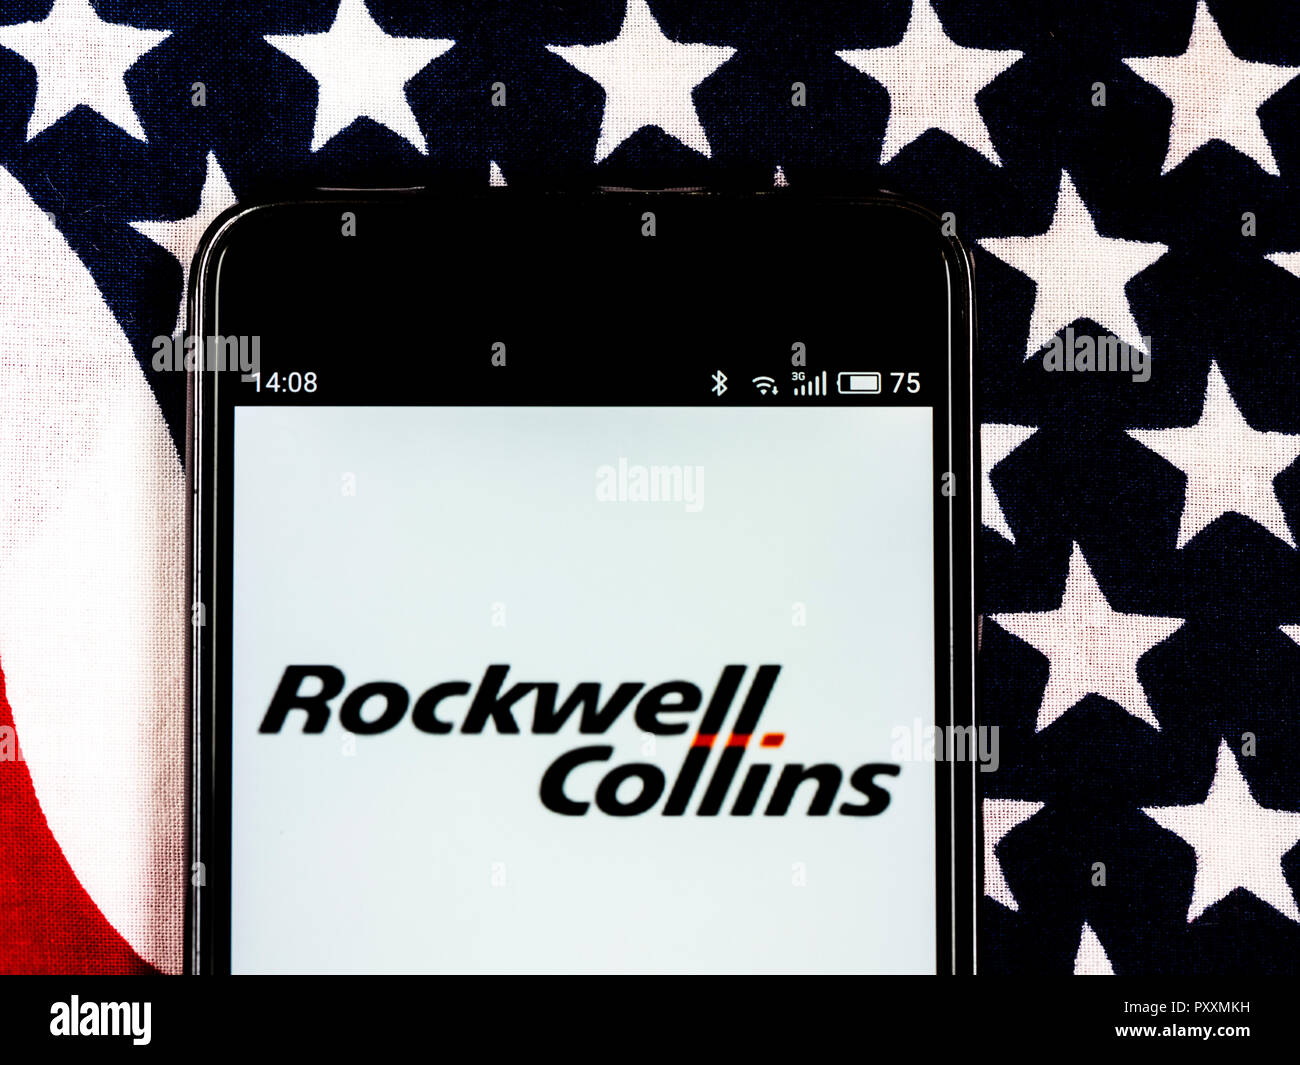 Rockwell Collins Company logo seen displayed on smart phone. Rockwell Collins, Inc. is an American multinational company headquartered in Cedar Rapids, Iowa providing avionics and information technology systems and services to government agencies and aircraft manufacturers. Stock Photo